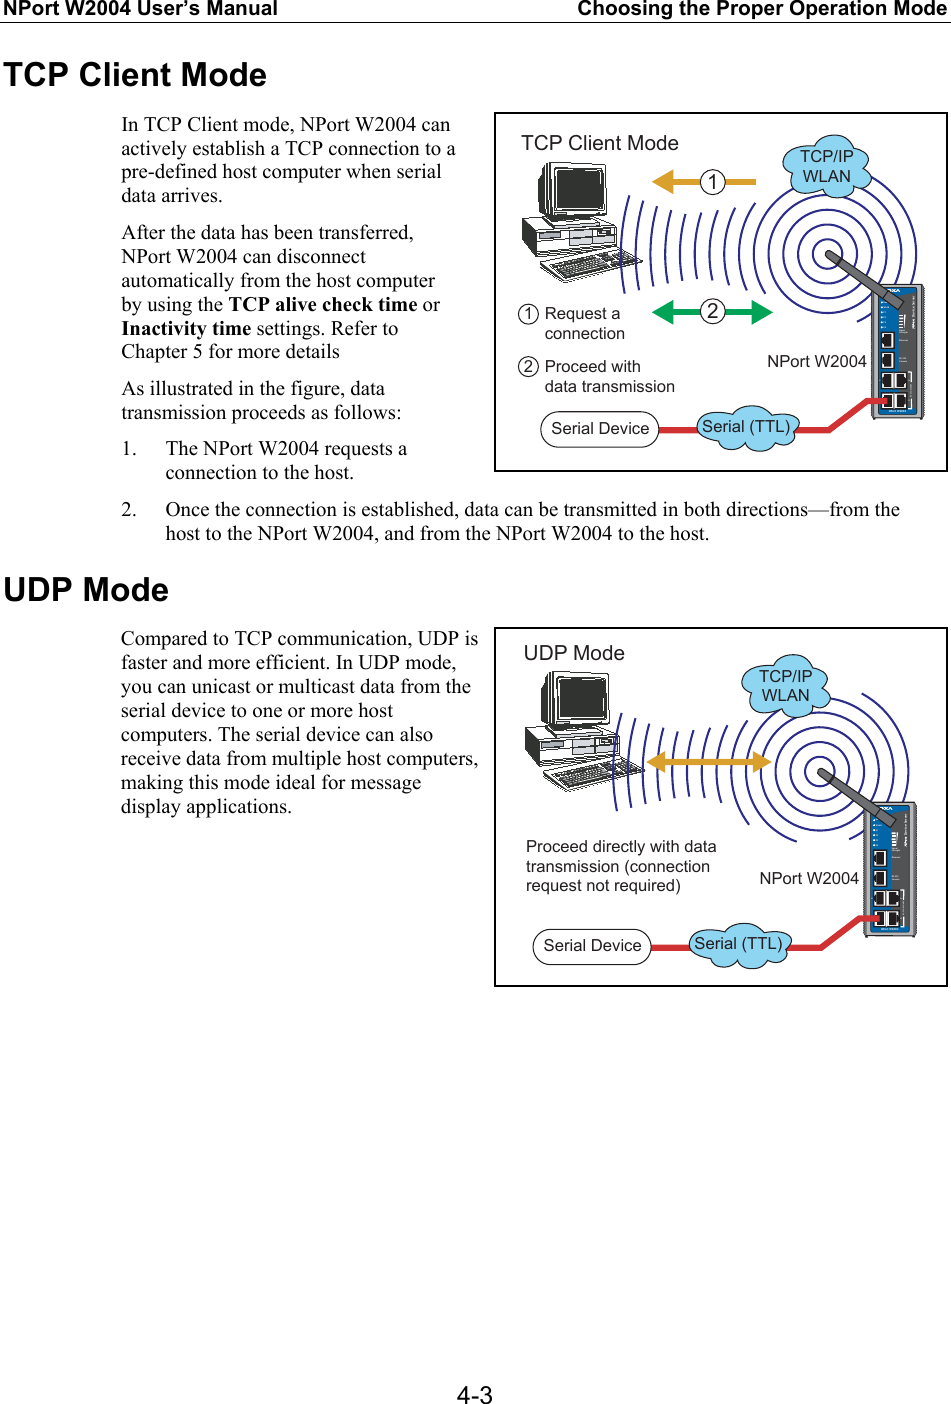 NPort W2004 User’s Manual  Choosing the Proper Operation Mode  4-3TCP Client Mode In TCP Client mode, NPort W2004 can actively establish a TCP connection to a pre-defined host computer when serial data arrives. After the data has been transferred, NPort W2004 can disconnect automatically from the host computer by using the TCP alive check time or Inactivity time settings. Refer to Chapter 5 for more details As illustrated in the figure, data transmission proceeds as follows: 1. The NPort W2004 requests a connection to the host. TCP Client ModeRequest aconnectionProceed withdata transmission1212NPort W2004TCP/IPWLANRS-232ConsoleDevice ServerNPort W2004WLANP1P3P2P4P1P2P3P4SignalStrengthReadyRS-232/422/485EthernetSerial (TTL)Serial Device2. Once the connection is established, data can be transmitted in both directions—from the host to the NPort W2004, and from the NPort W2004 to the host. UDP Mode Compared to TCP communication, UDP is faster and more efficient. In UDP mode, you can unicast or multicast data from the serial device to one or more host computers. The serial device can also receive data from multiple host computers, making this mode ideal for message display applications. UDP ModeProceed directly with datatransmission (connectionrequest not required) NPort W2004TCP/IPWLANRS-232ConsoleDevice ServerNPort W2004WLANP1P3P2P4P1P2P3P4SignalStrengthReadyRS-232/422/485EthernetSerial (TTL)Serial Device    